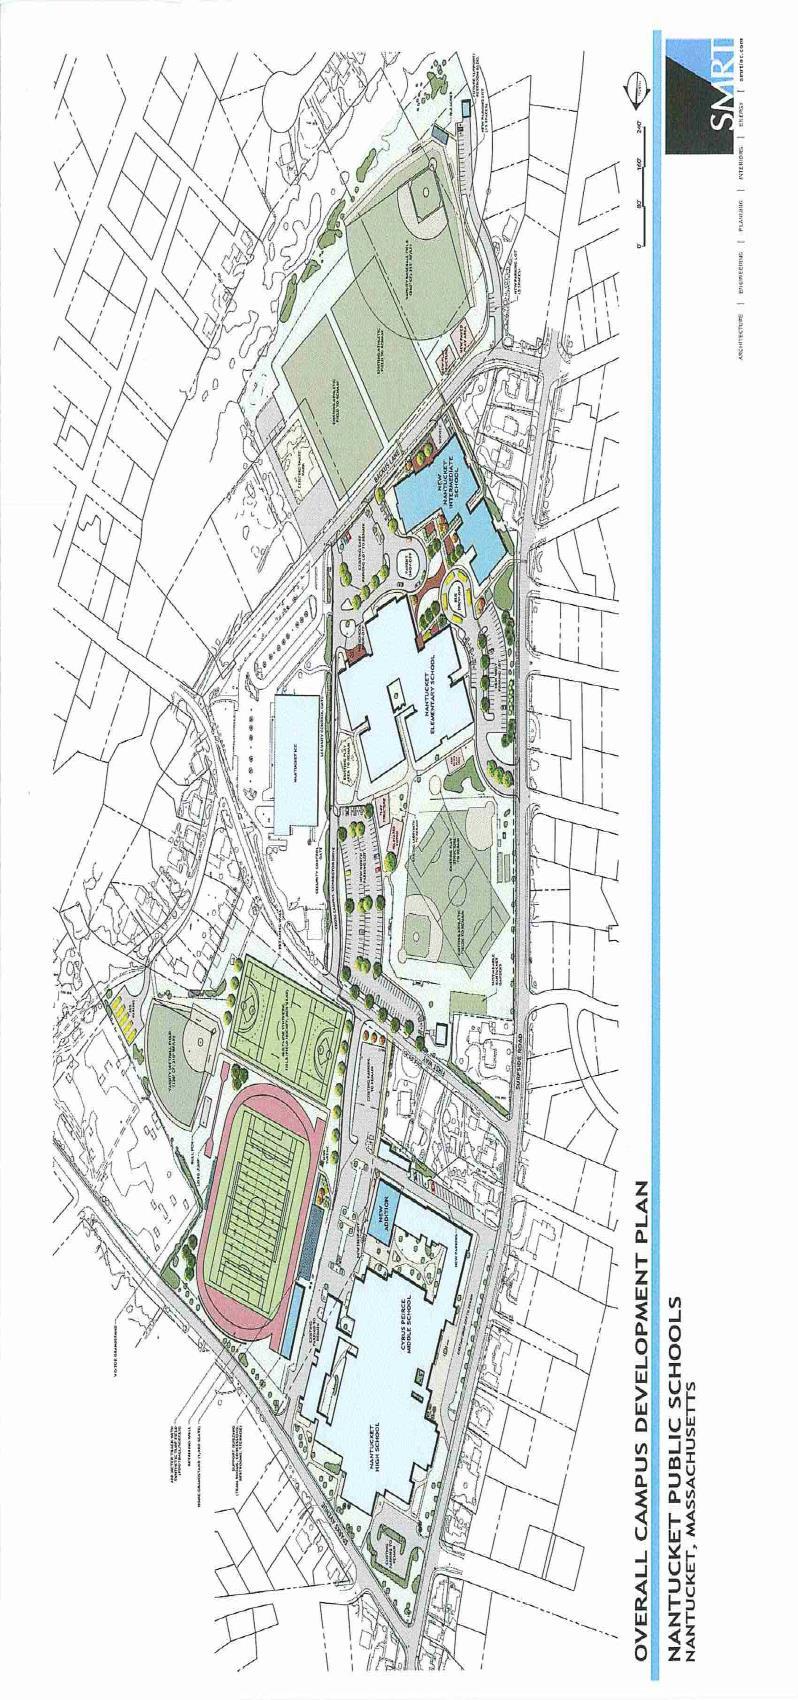 Nantucket Public Schools 2020 Capital Requests NPS Campus Wide Master Plan This request is to create a master plan for the public schools athletic complex and future